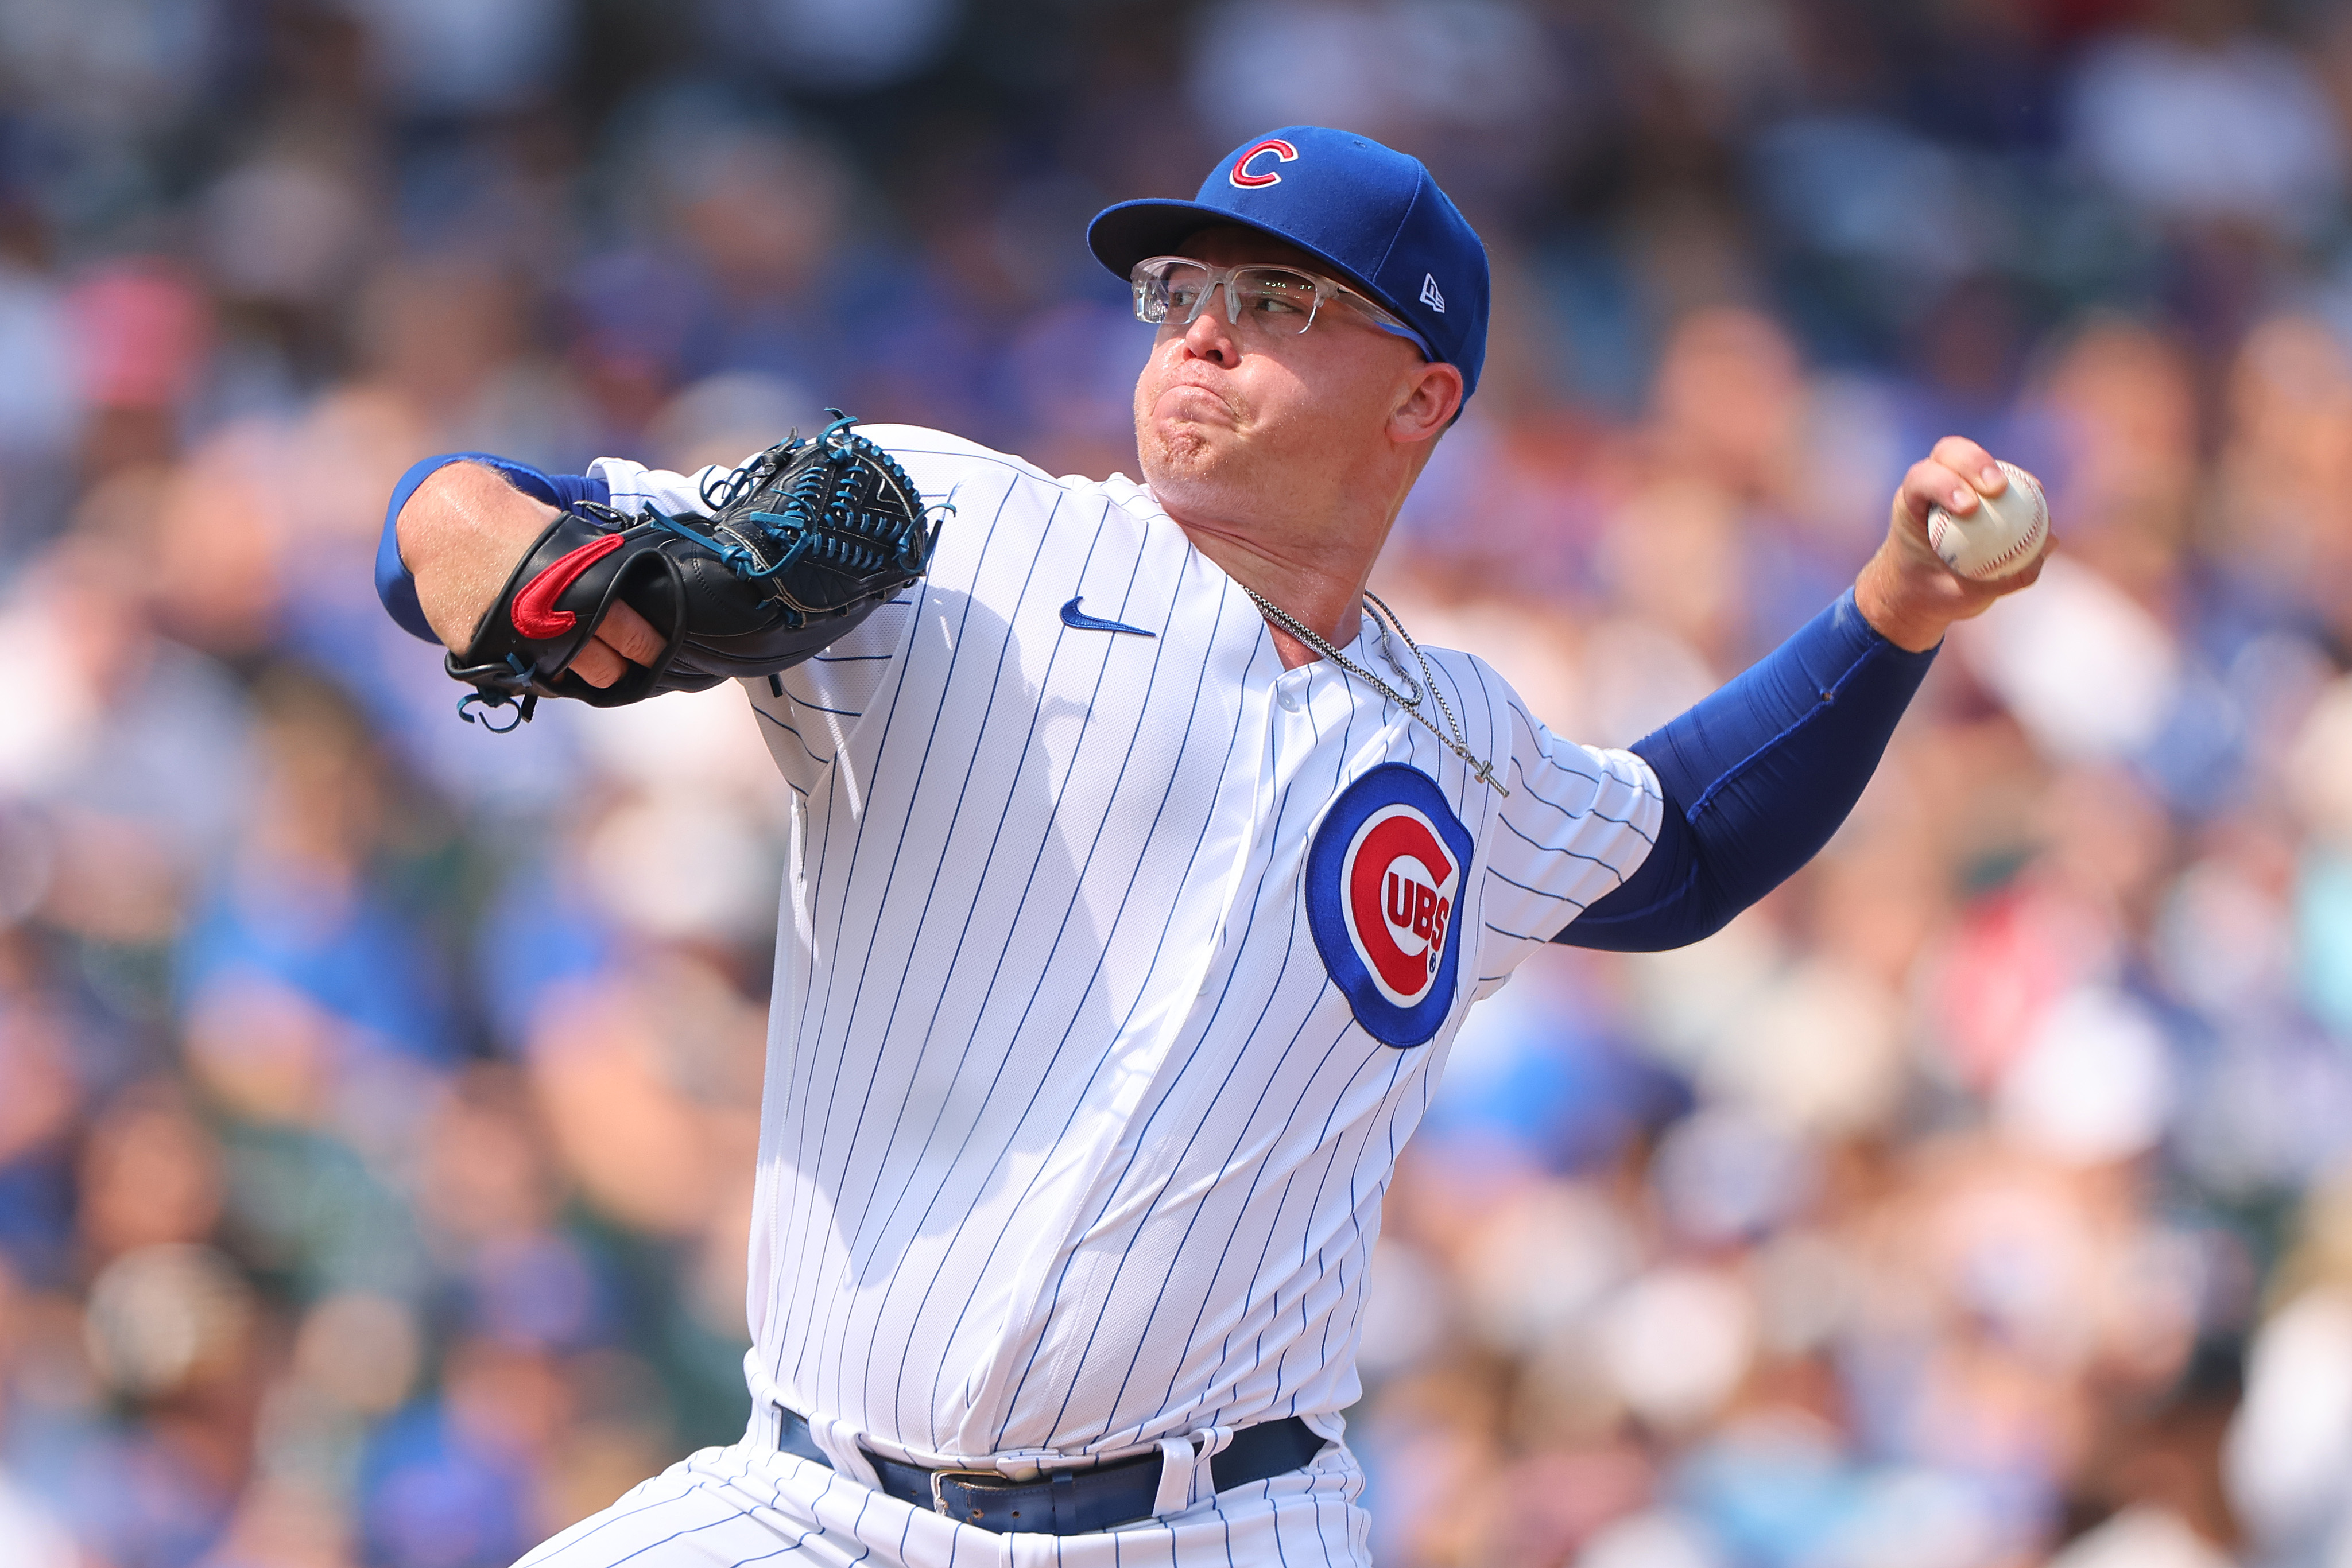 Cubs Use Four Of Their Top Five Picks On Pitching